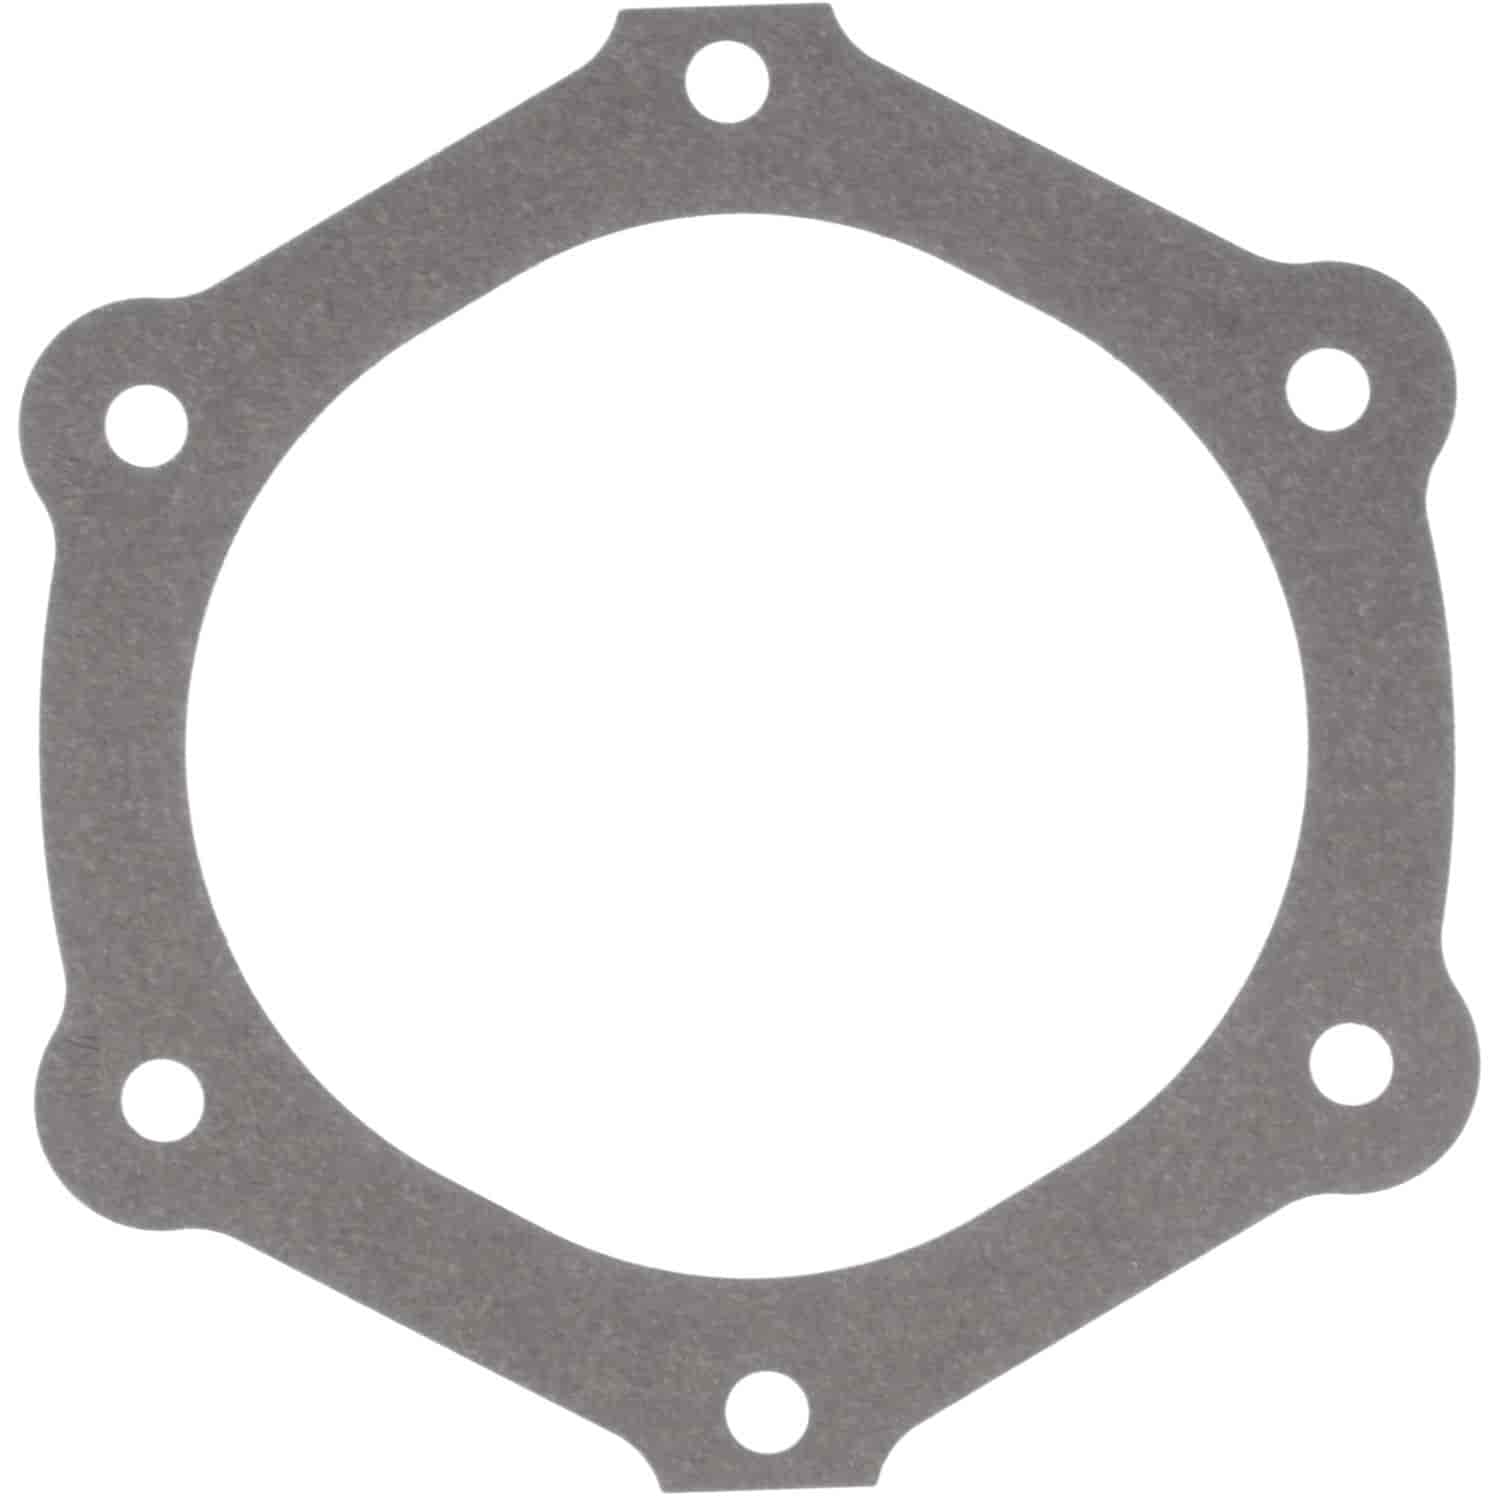 Water Pump Gasket 1955-2002 Small Block Chevy 265/267/283/302/305/307/327/350/400